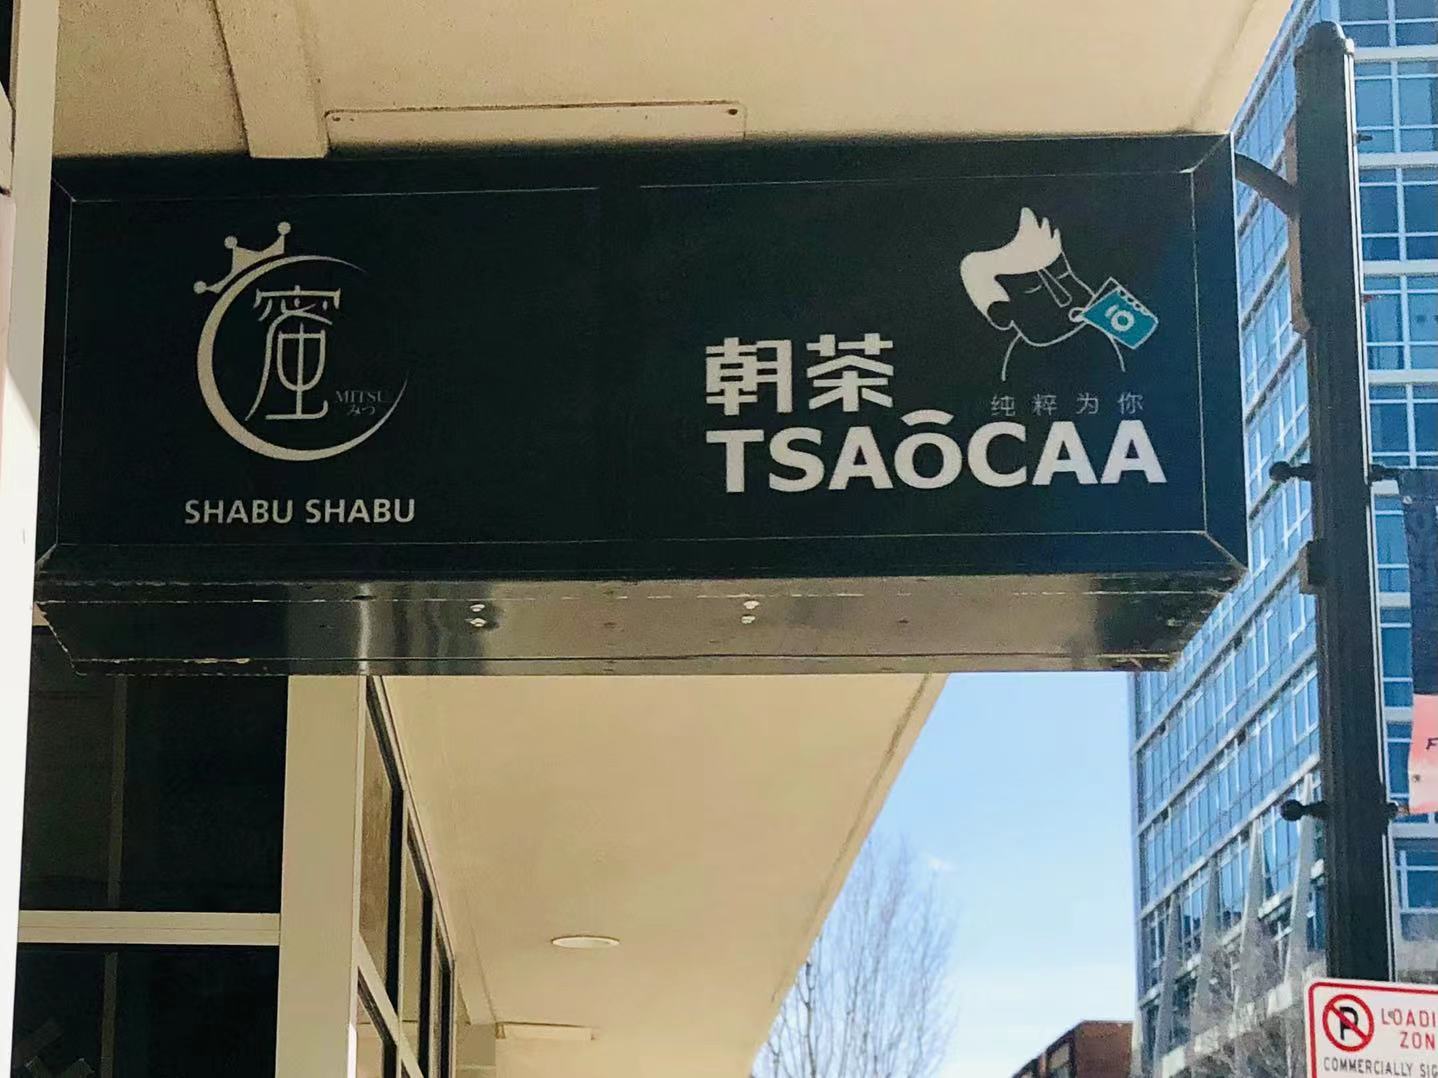 The exterior of Tsaocaa in Champaign has a black awning with the boba tea shop's name. Green Street during daylight is in the background. Photo by Xiaohui Zhang.